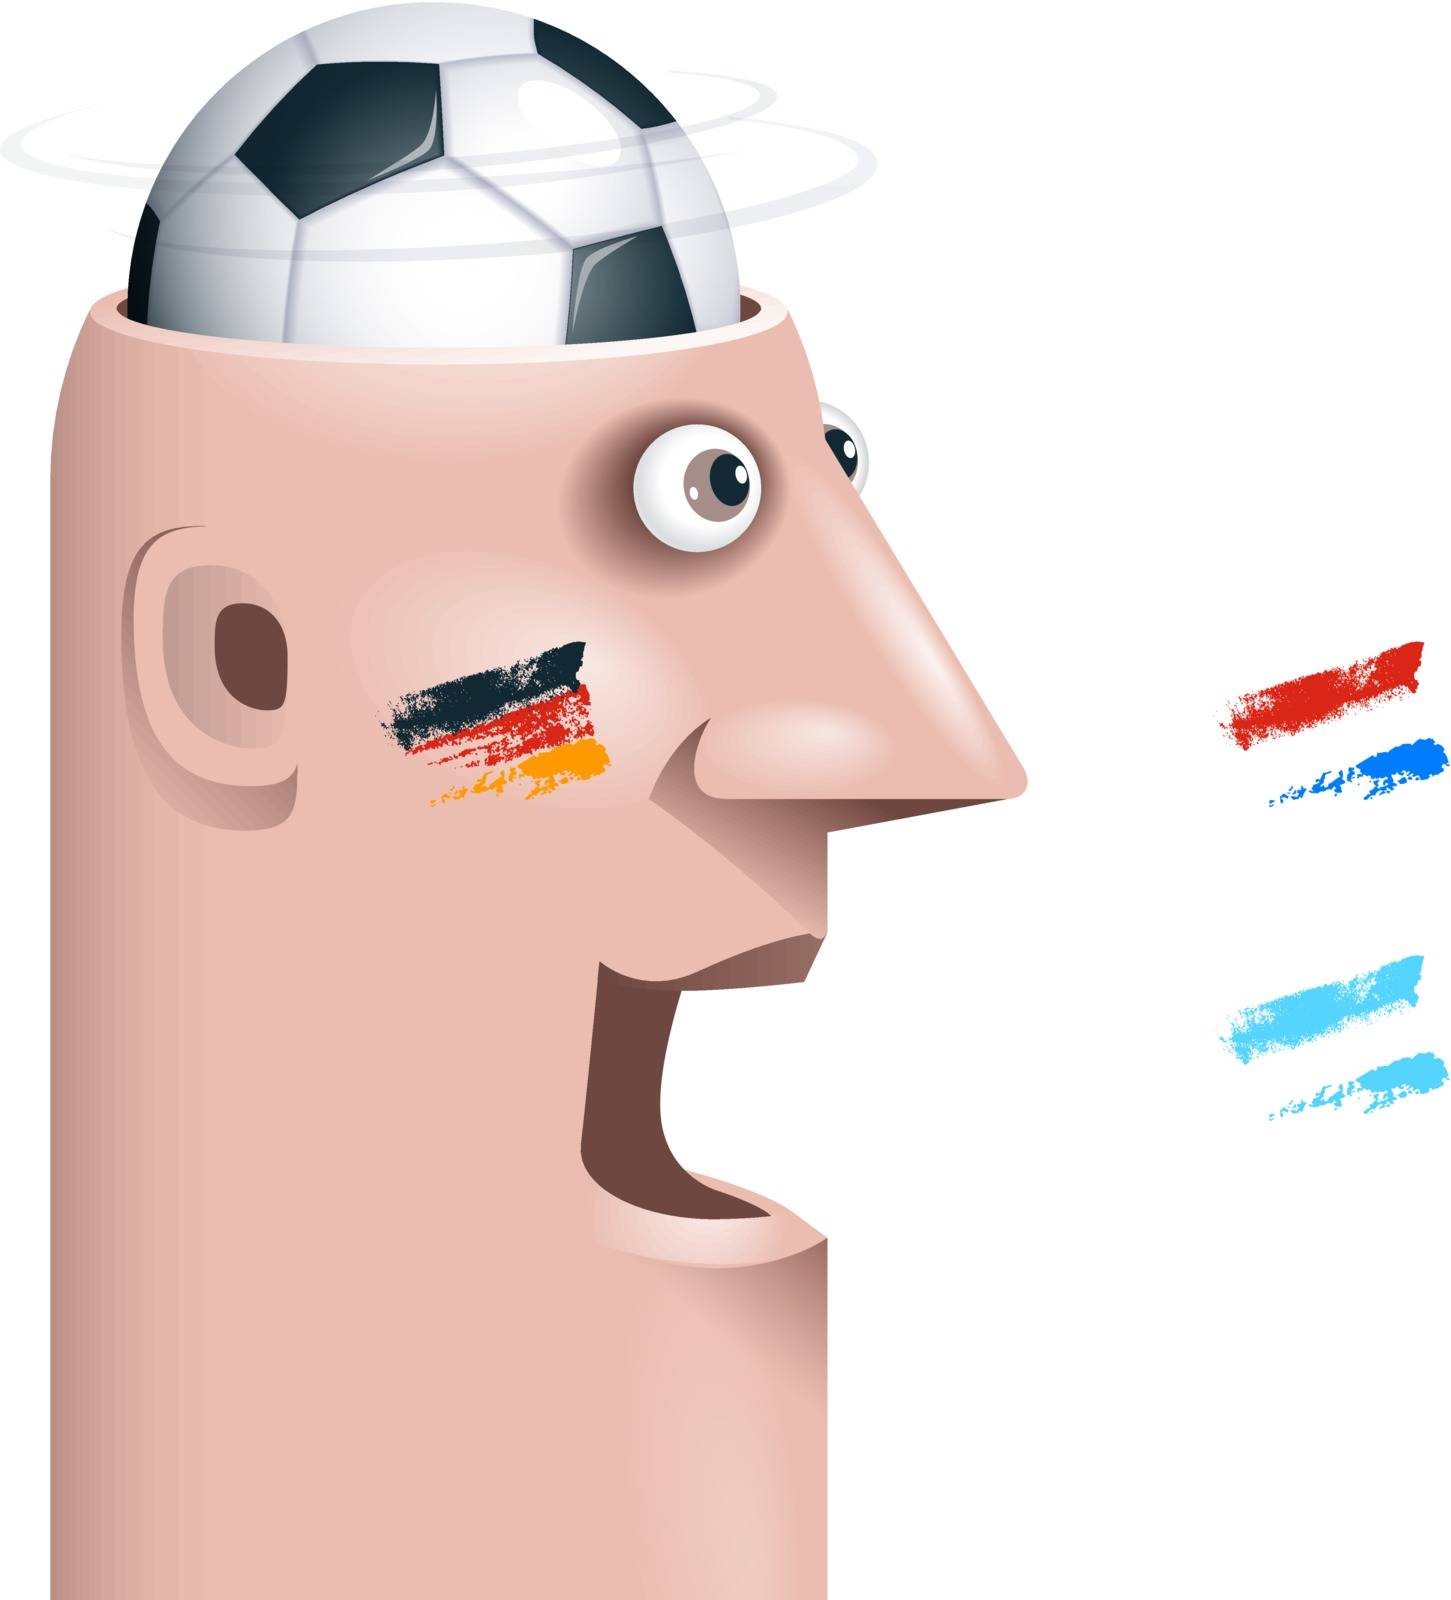 Soccer fan with ball in head. Eps10 Transparency used RGB Global colors Gradients used